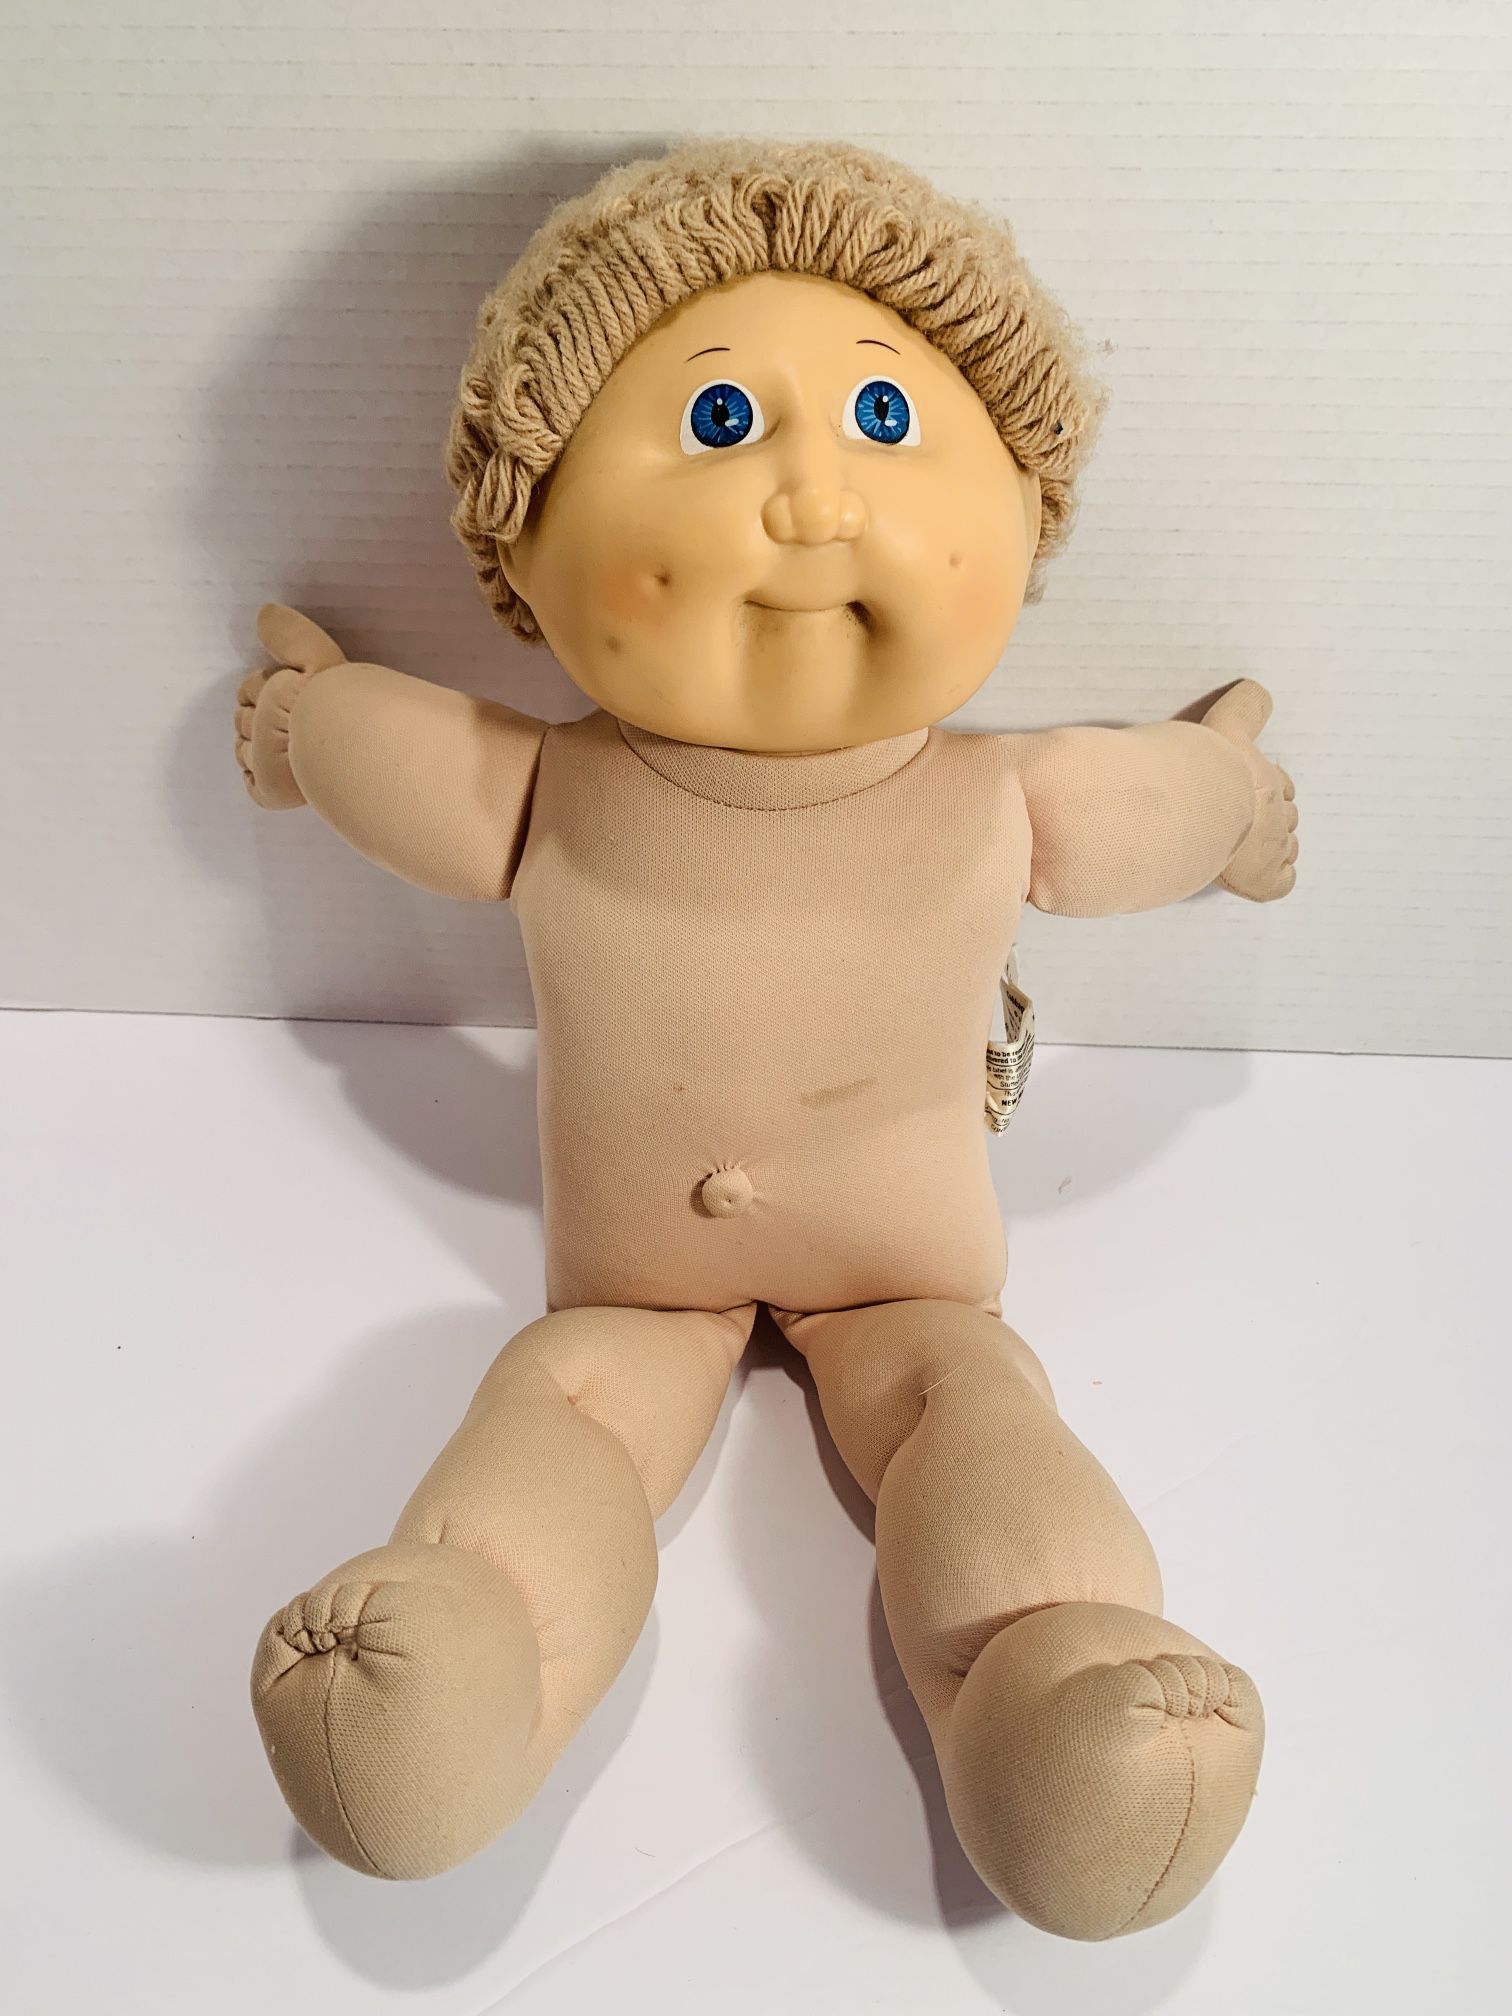 Vintage 1(contact info removed) Boy Cabbage Patch Doll Blonde Curly Hair Blue Eyes.  